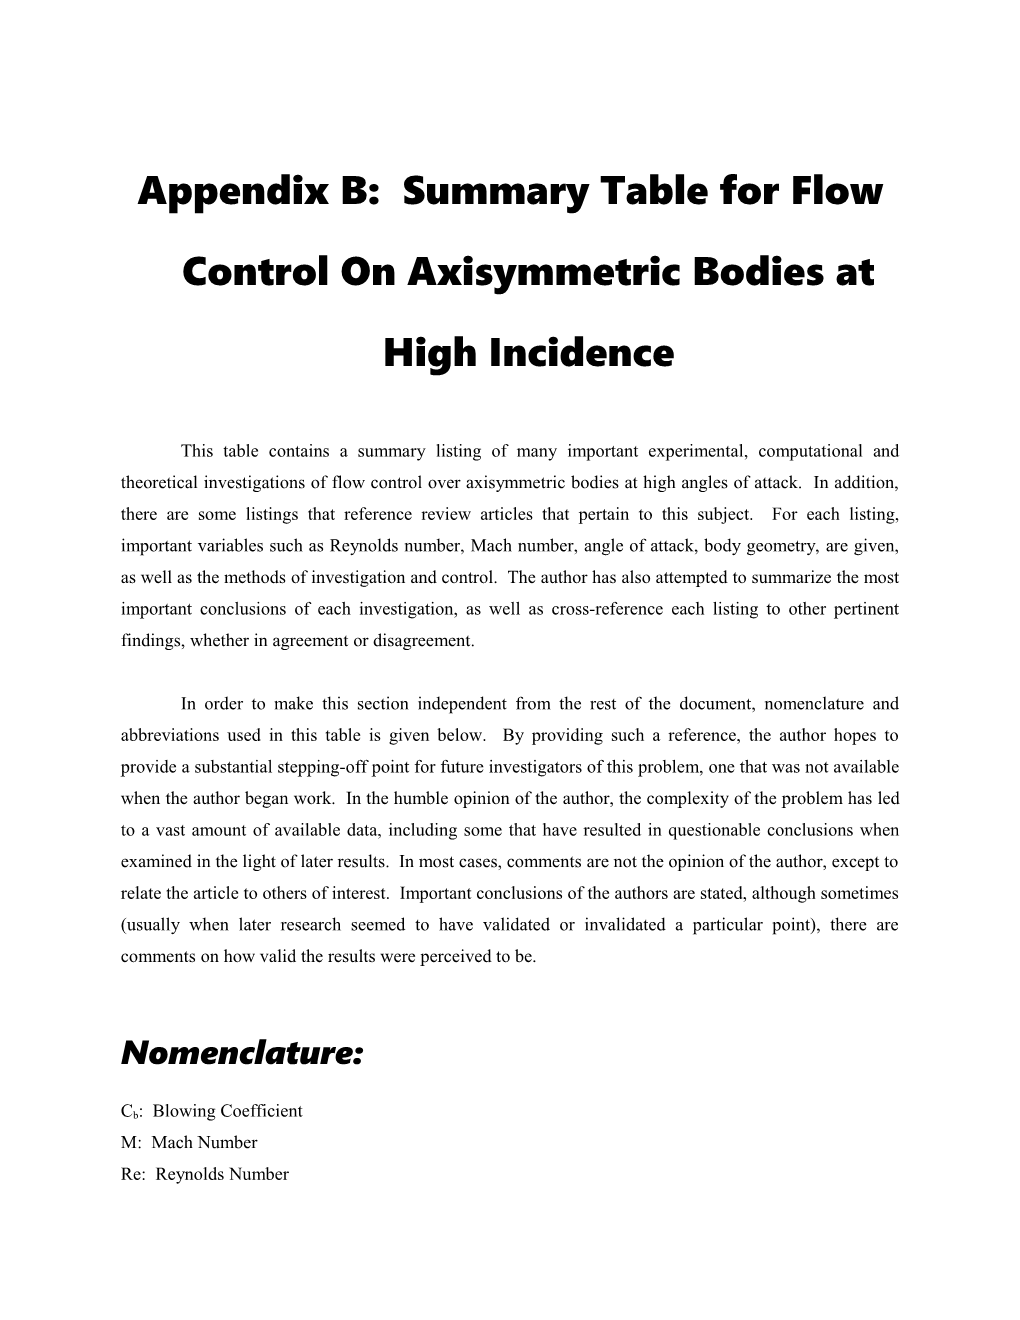 Appendix B: Summary Table for Flow Control on Axisymmetric Bodies at High Incidence